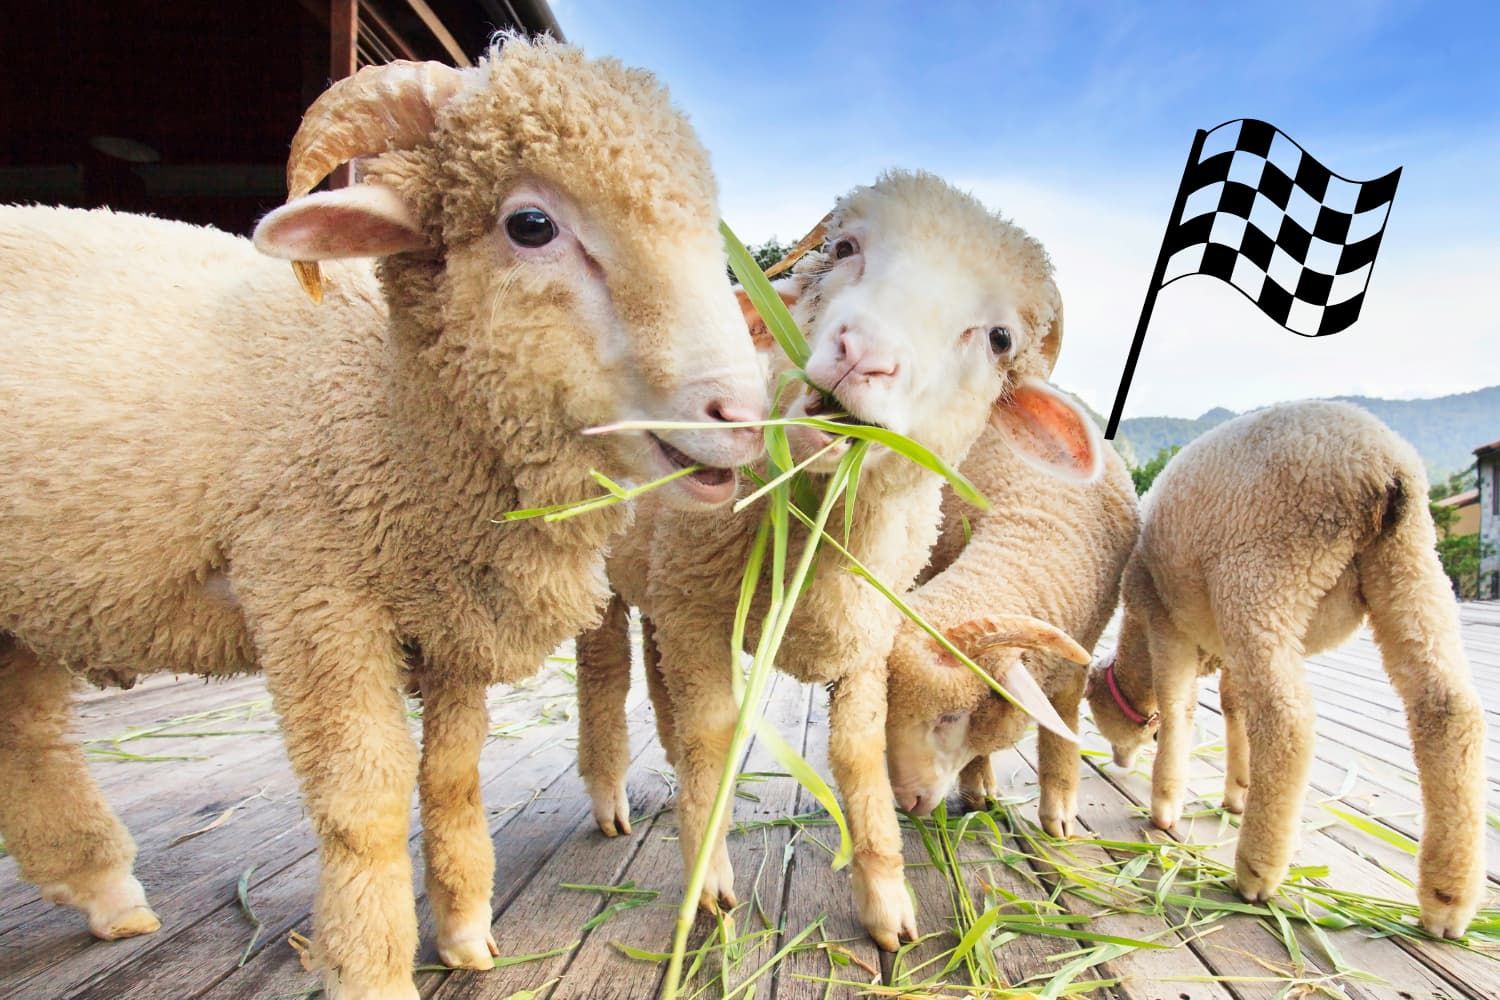 Game%20-%20OT%20Psalm%2023%20-%20The%20feed%20the%20sheep%20relay%20race-6bb58723 Comfort / Comforter